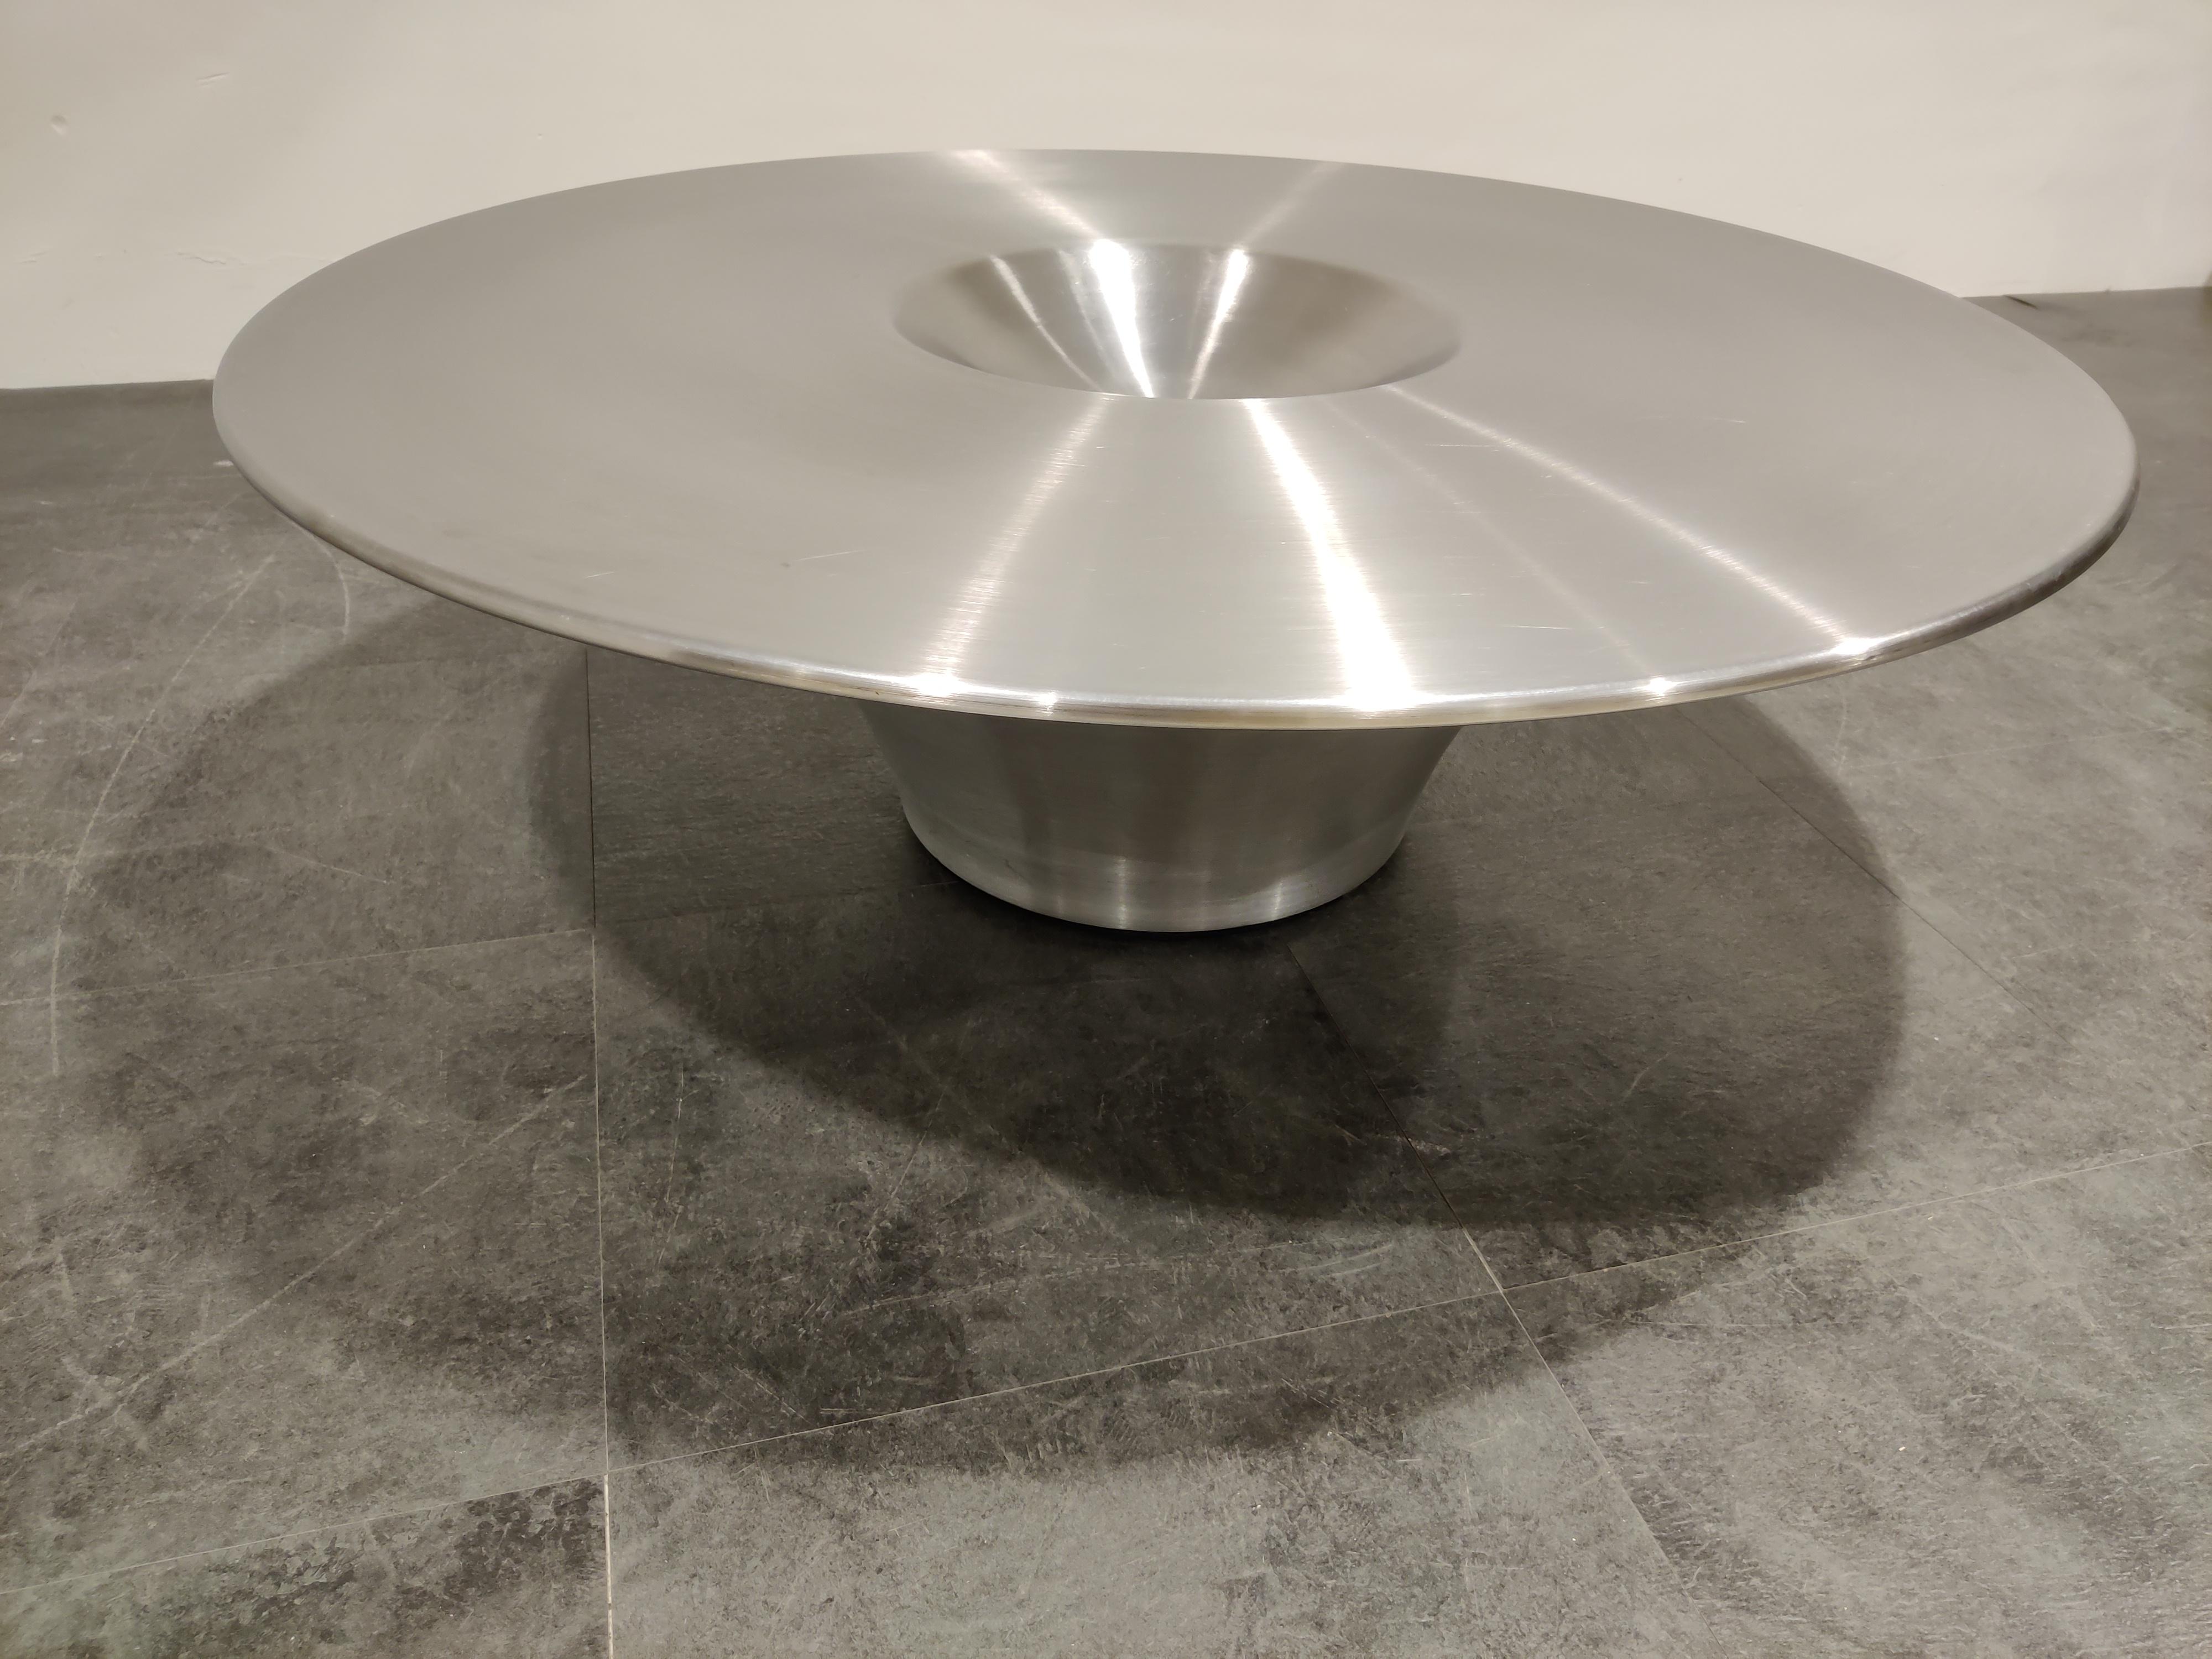 Contemporary Vintage Round Alien Coffee Table by Yasuhiro Shito for Cattelan, 2002